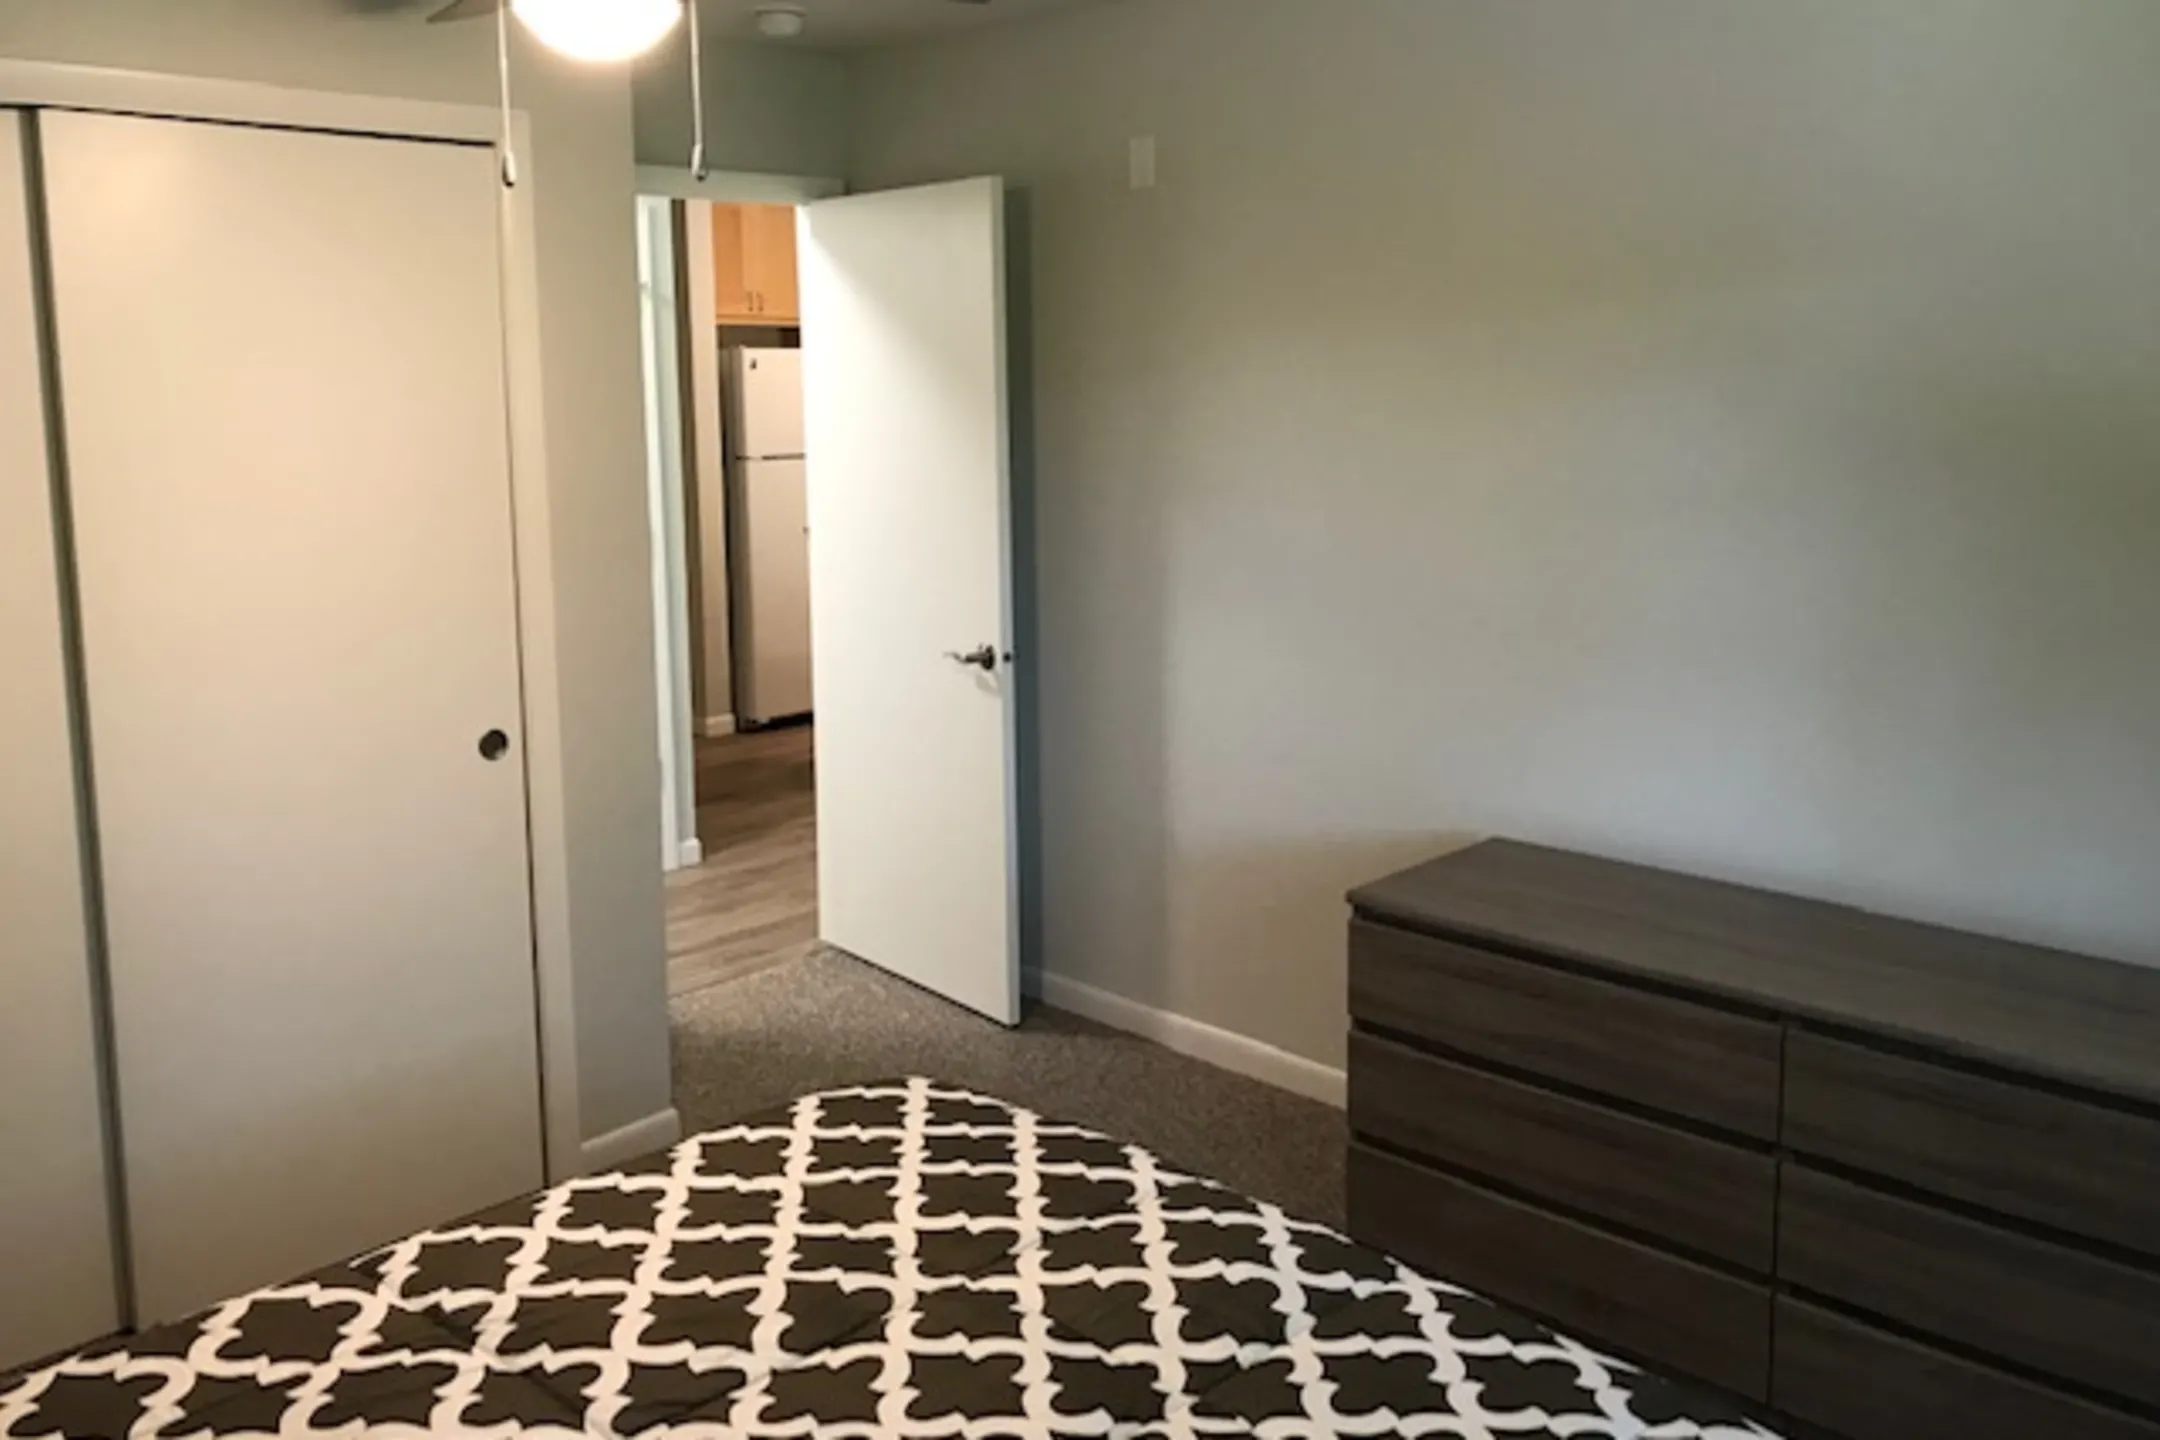 Bedroom - Sunrise Valley Apartments - Lancaster, WI